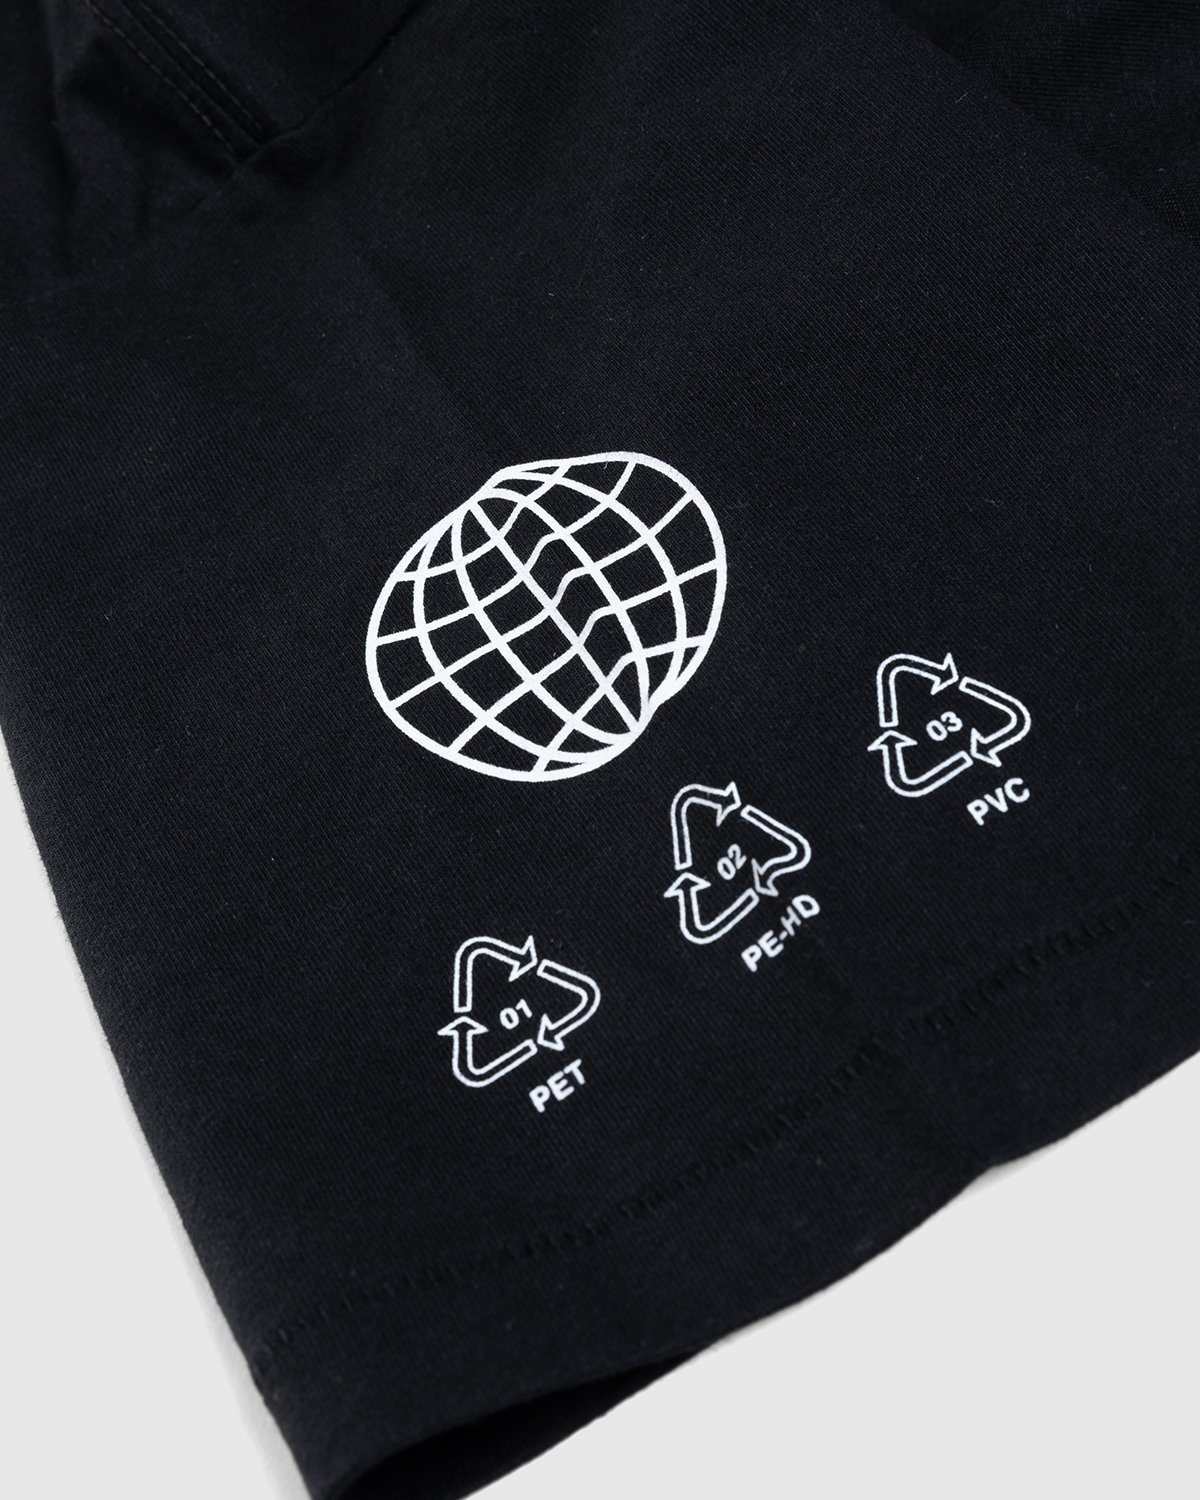 Space Available Studio - Eco System T-Shirt Black - Clothing - Black - Image 6